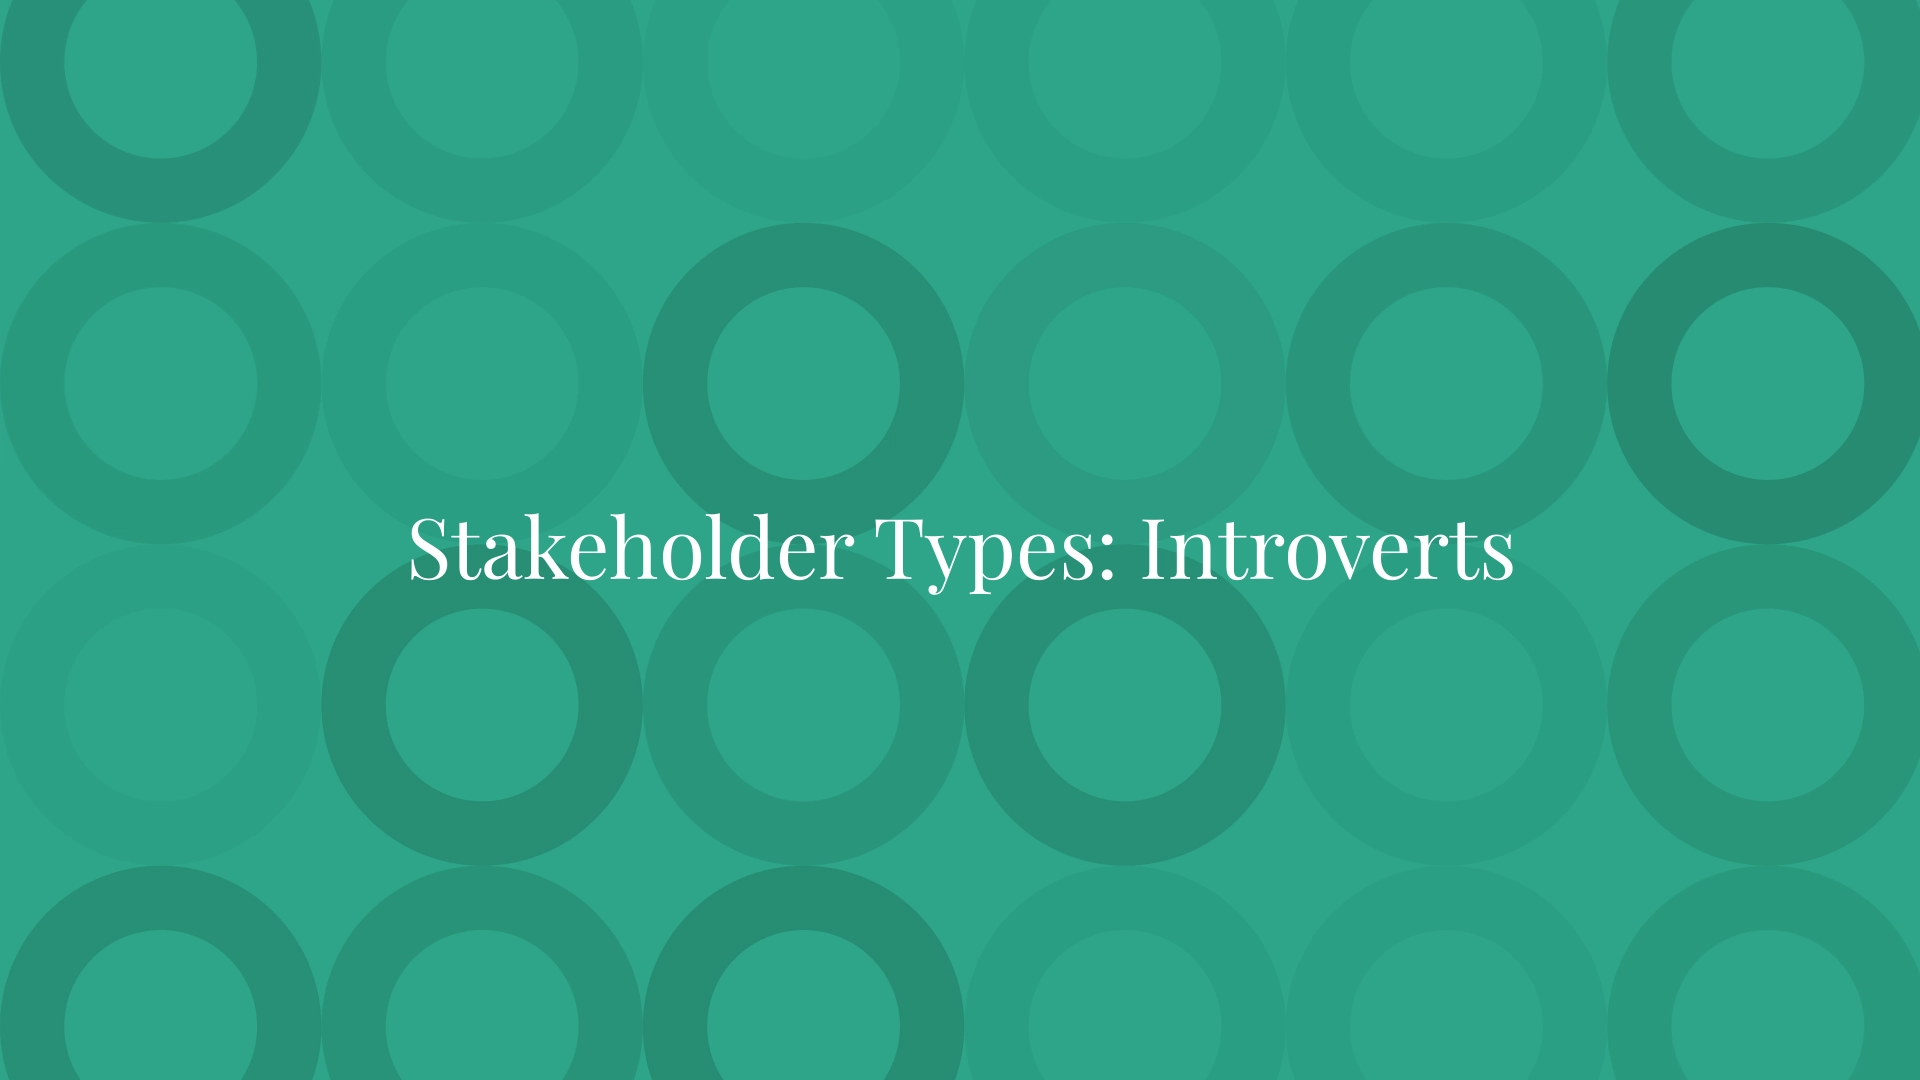 Stakeholder Types: Introverts